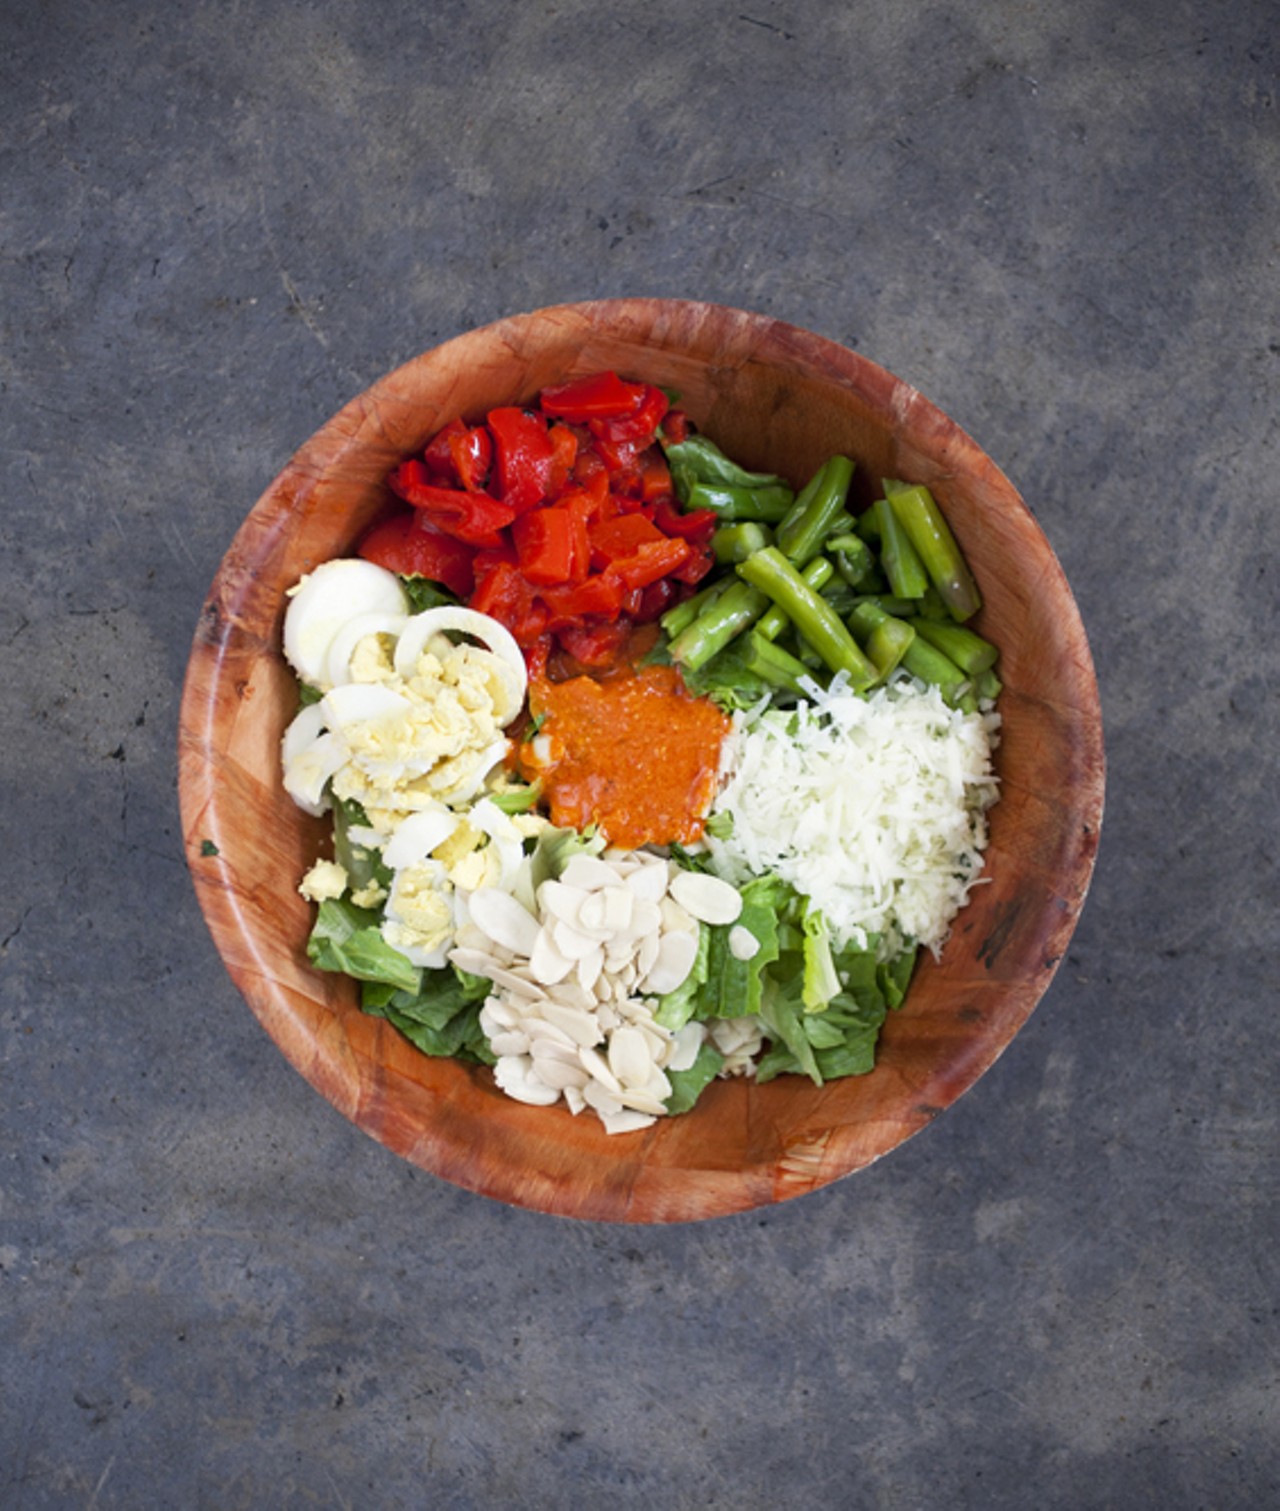 The Barcelona - romaine, roasted red peppers, asparagus, almonds, manchego, egg and their house-made romesco dressing.